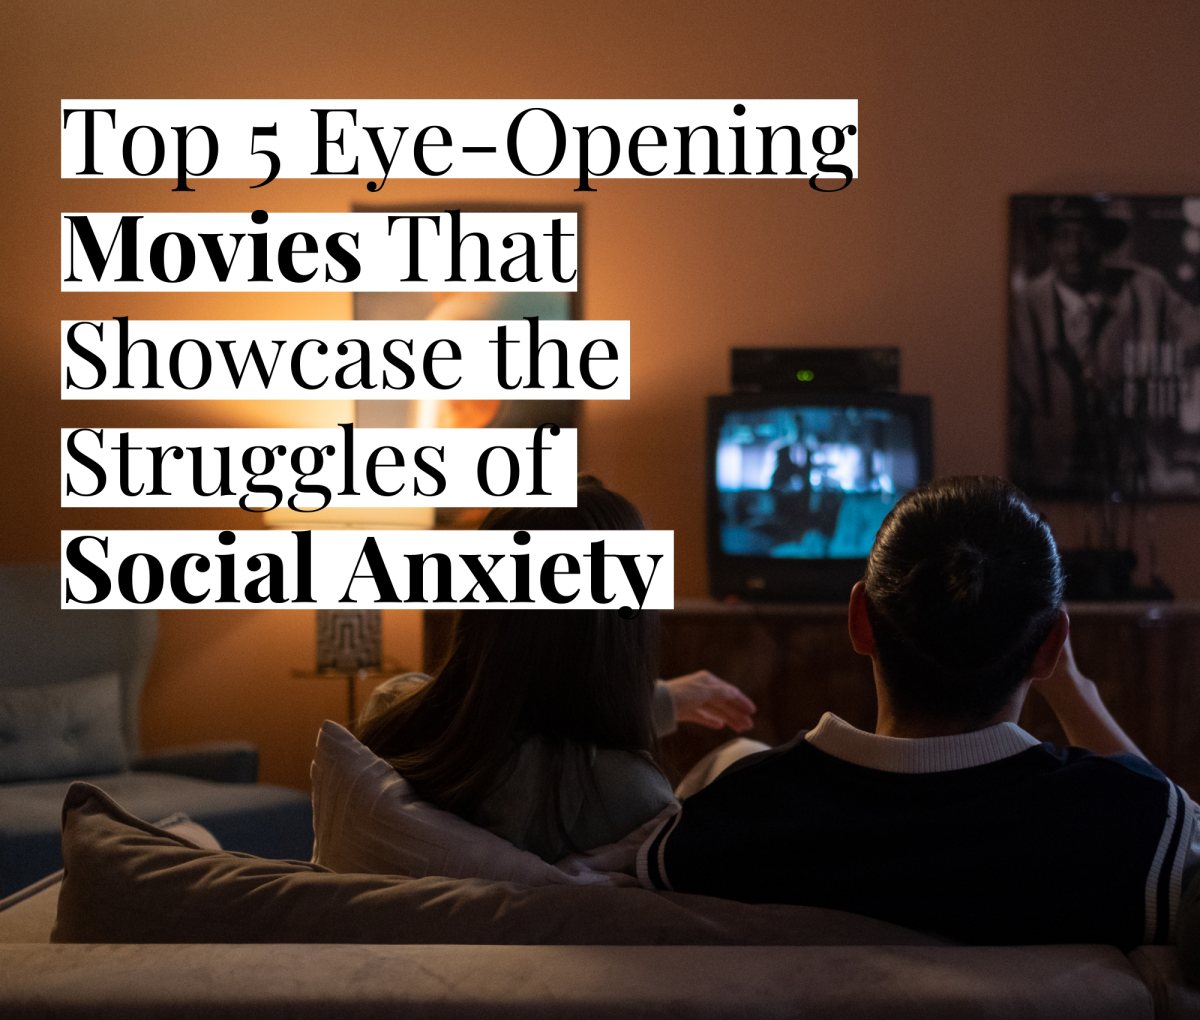 Top 5 Eye-Opening Movies That Showcase the Struggles of Social Anxiety